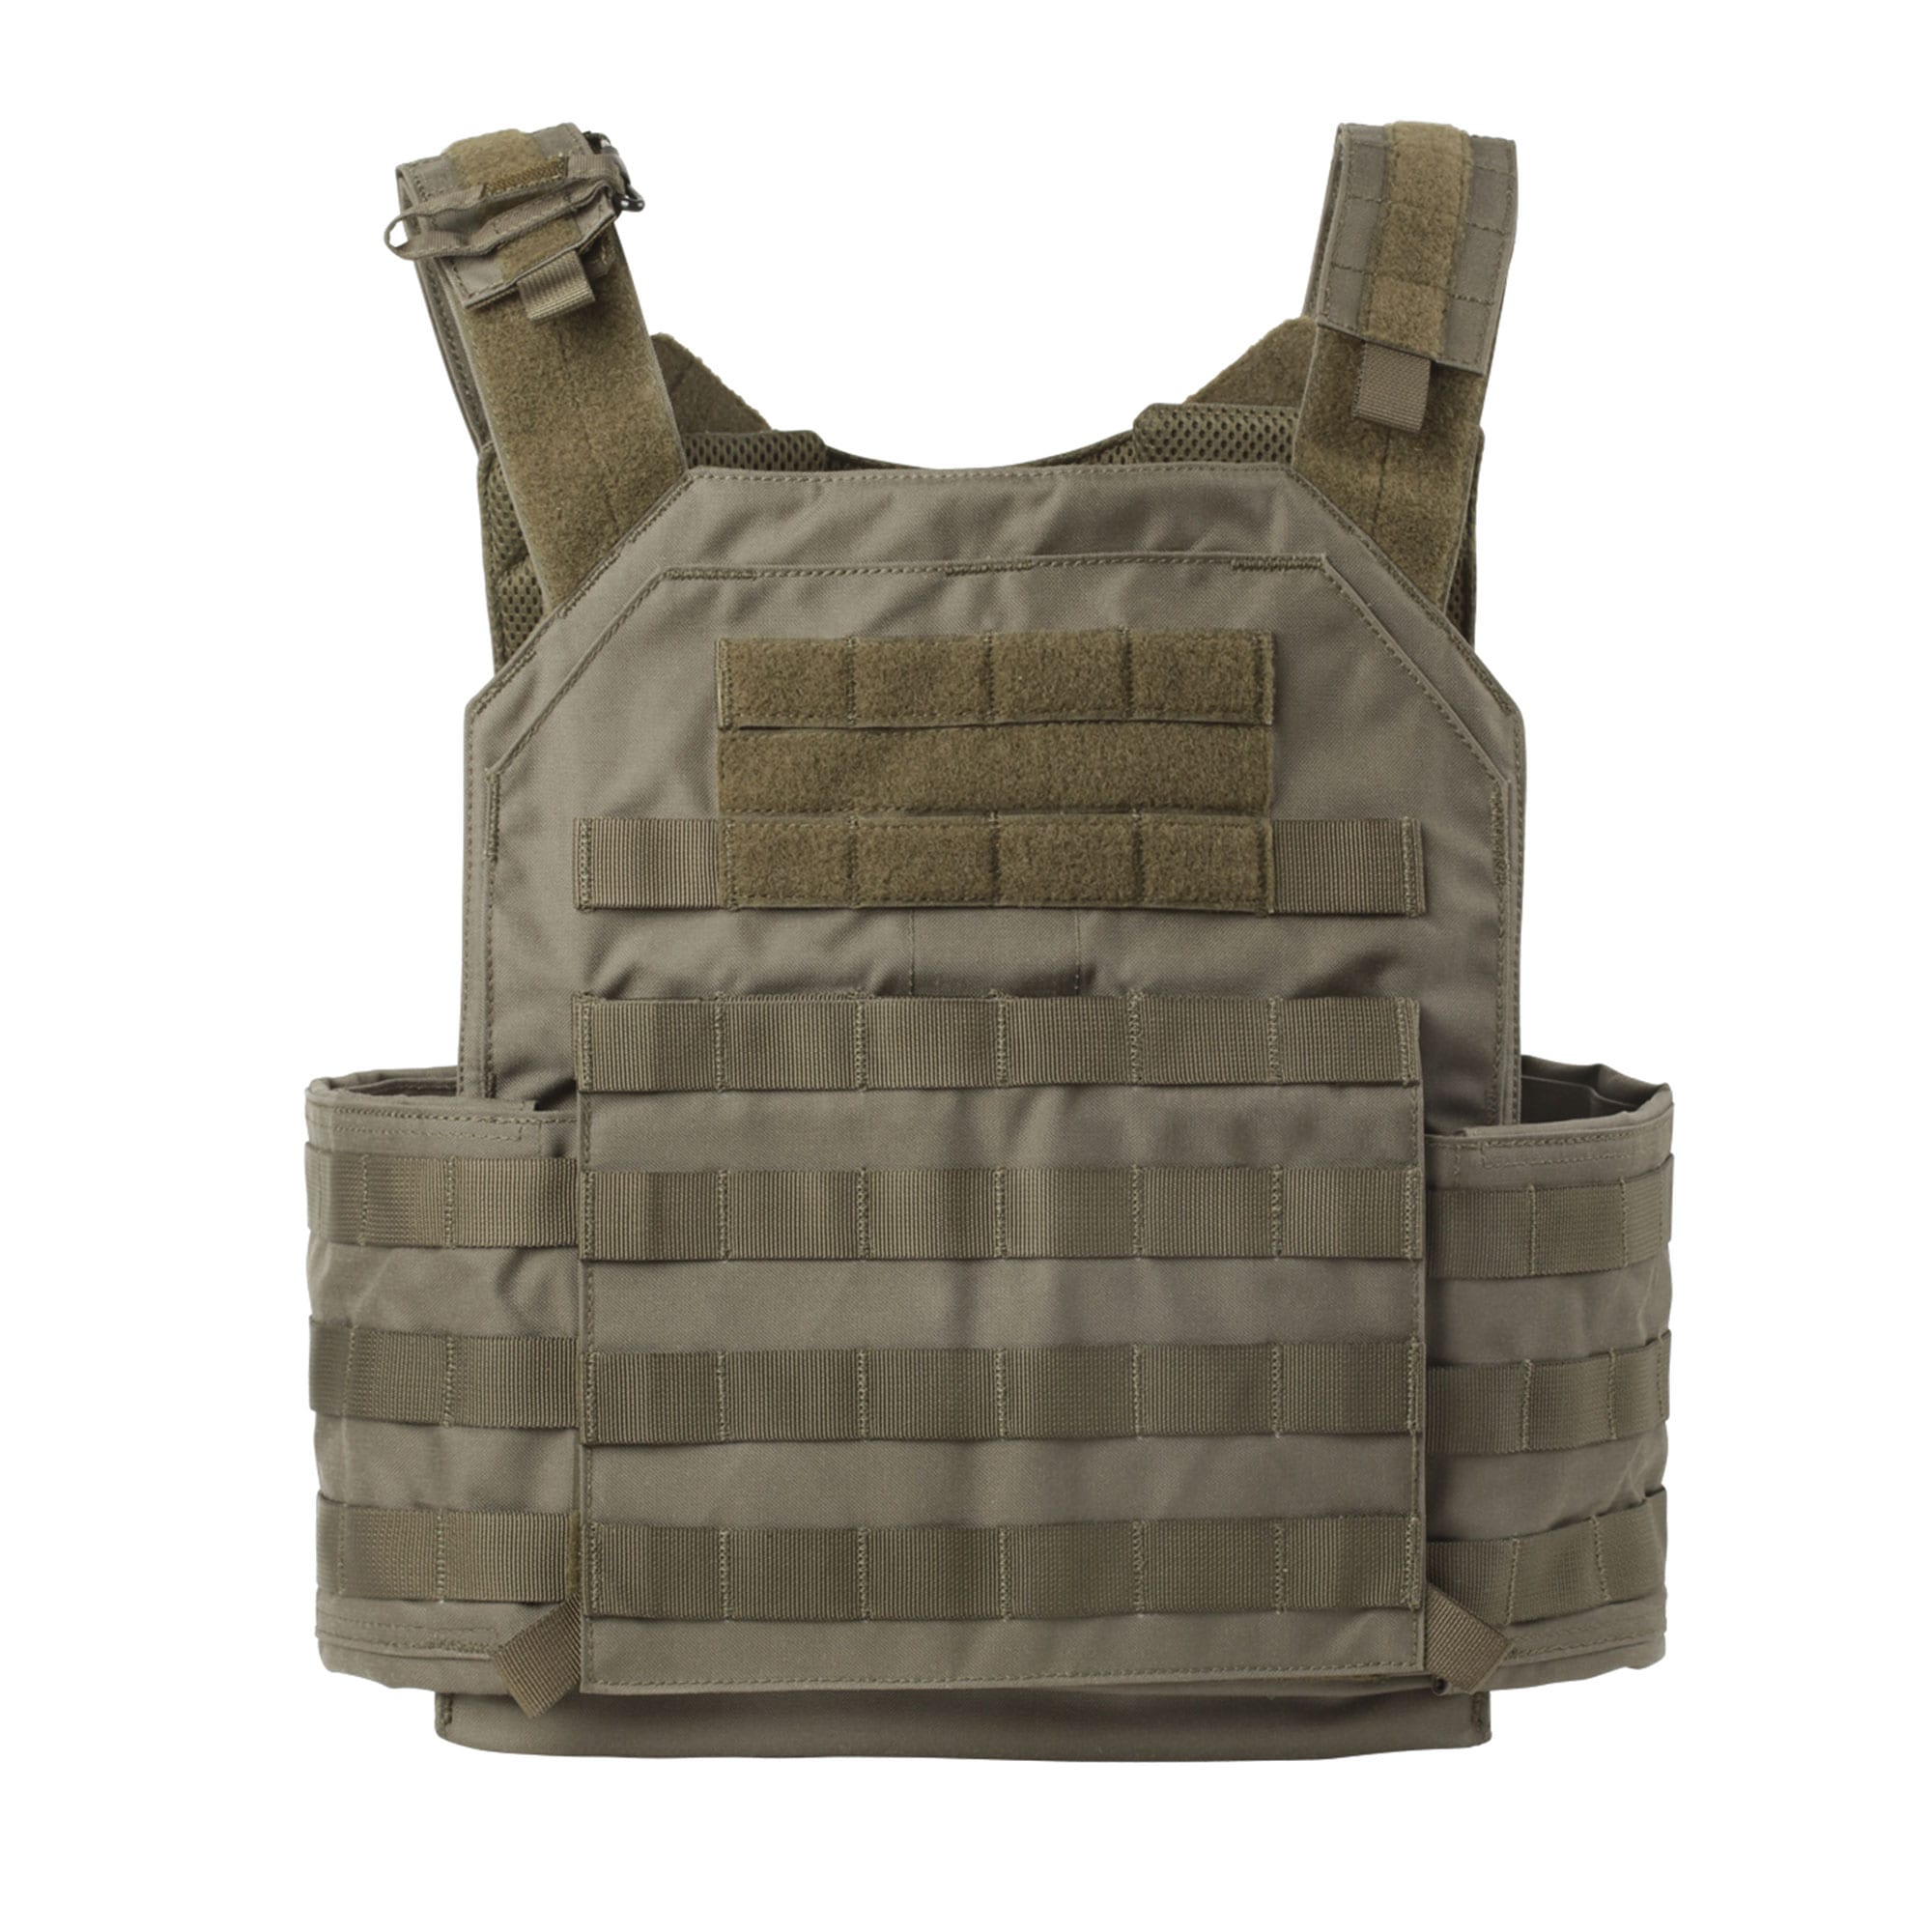 Purchase the Lindnerhof Plate Carrier LT025 stone gray by ASMC